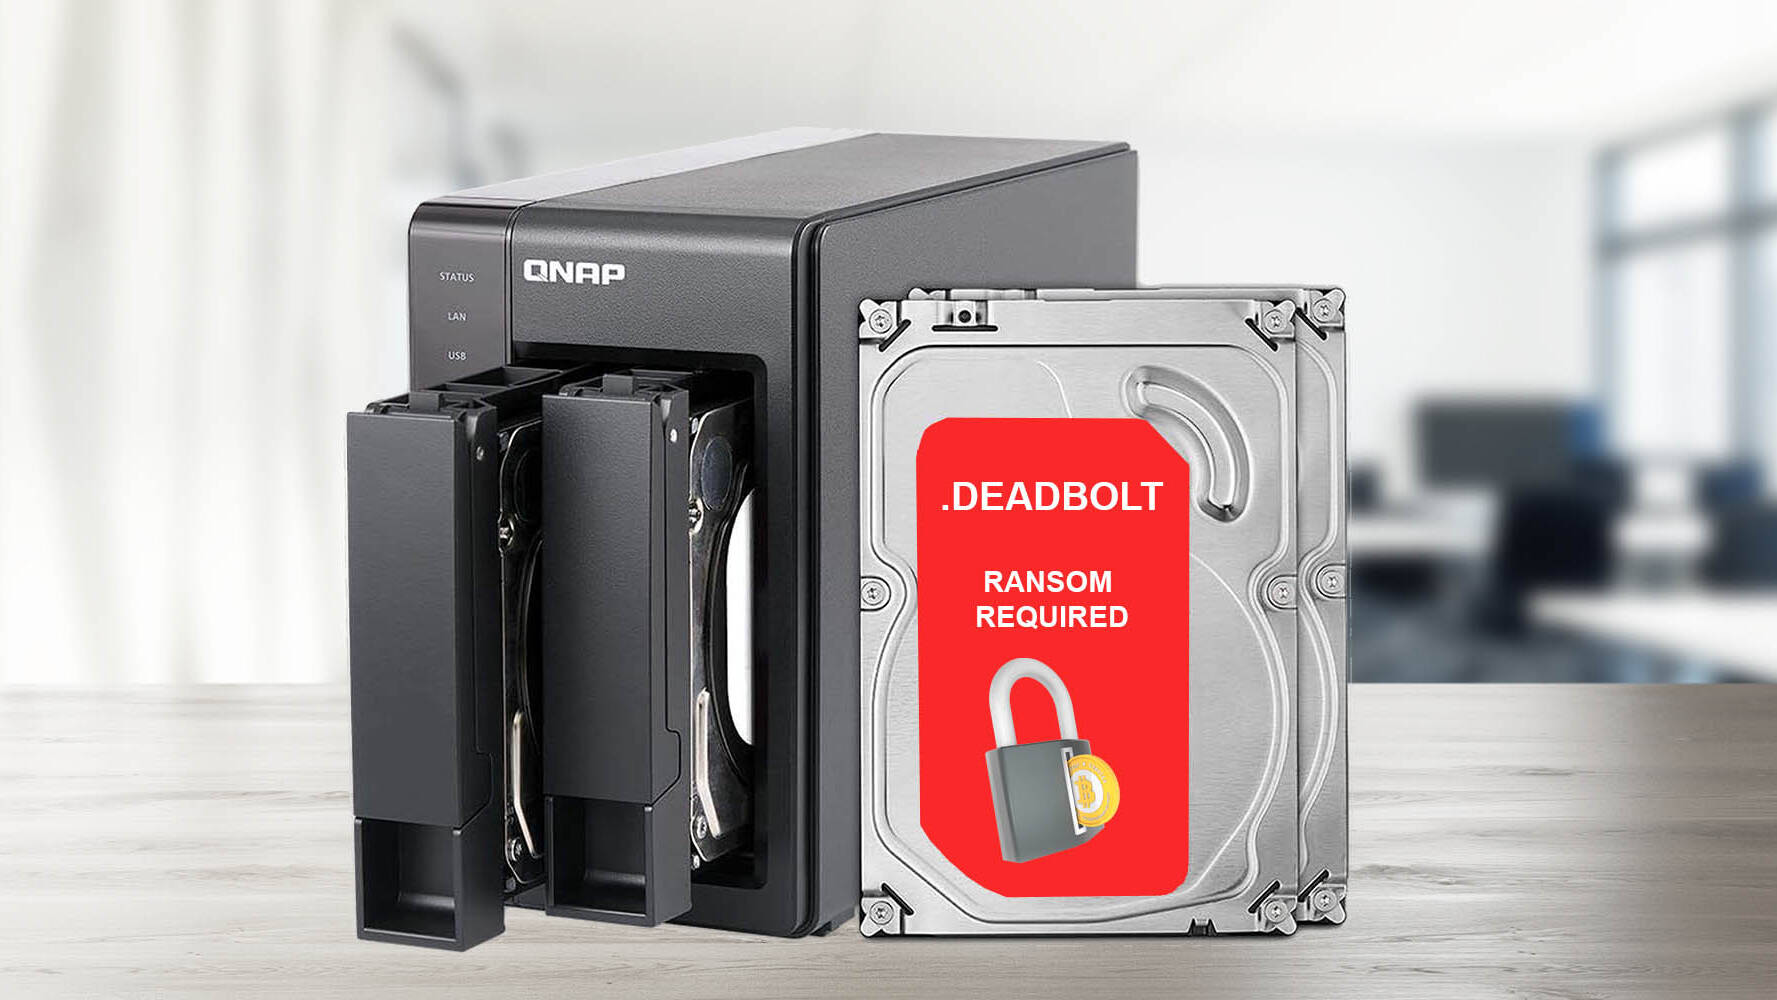 safeguard network attached storage NAS cybersecurity QNAP deadbolt